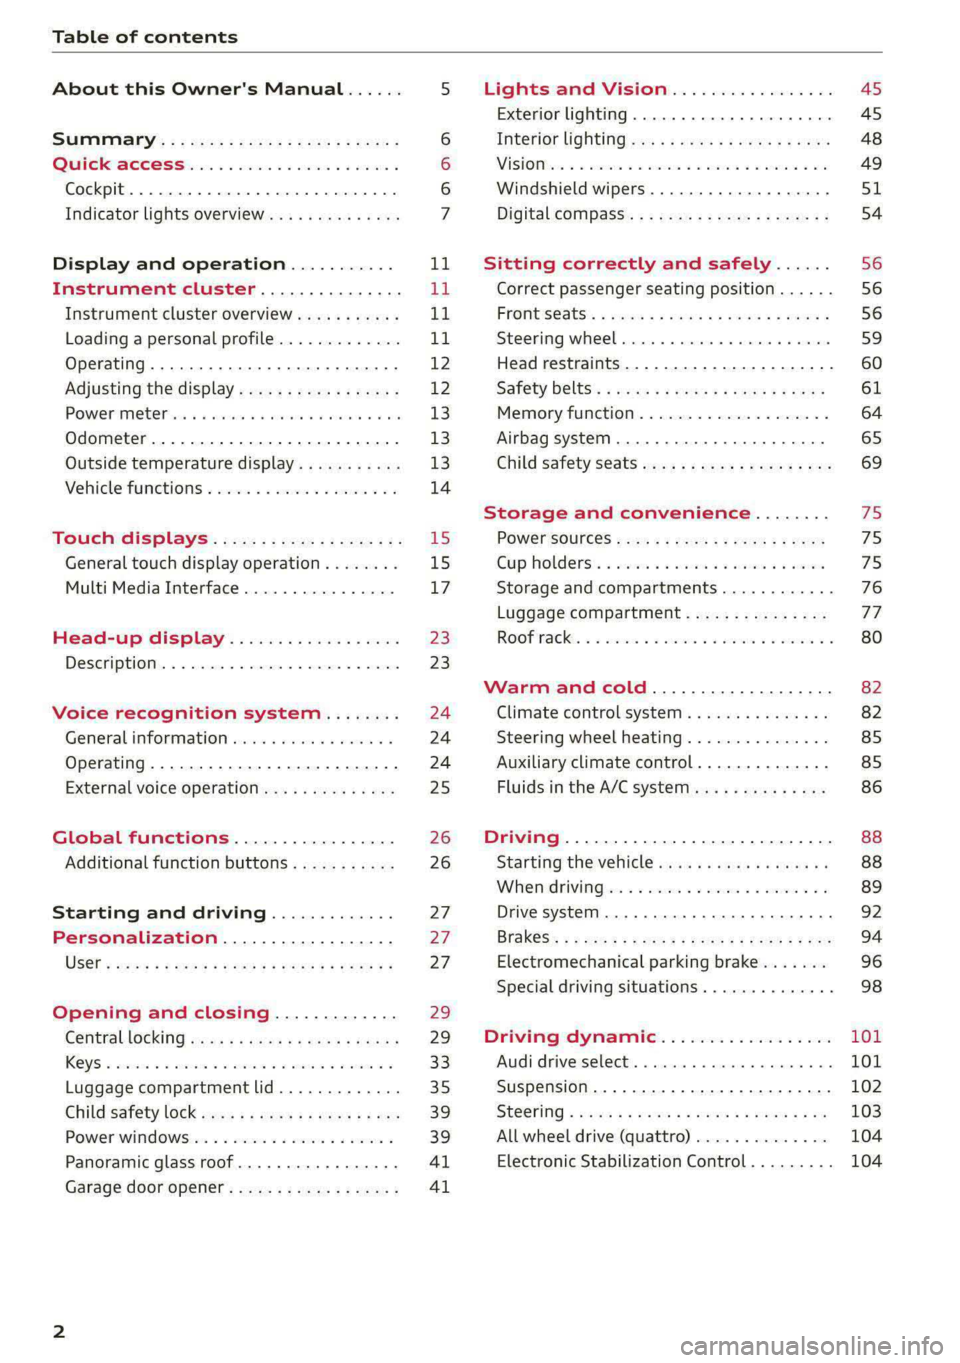 AUDI E-TRON 2020  Owners Manual Table of contents 
  
About this Owner's Manual...... 
SUMIMAry: < = exe : eens: Seen cs sens 
QutckeaeCe ssh: «i esis se ois a eaves @ 
Cockpit. ...... 0... eee eee eee  eee 
Indicator lights ov